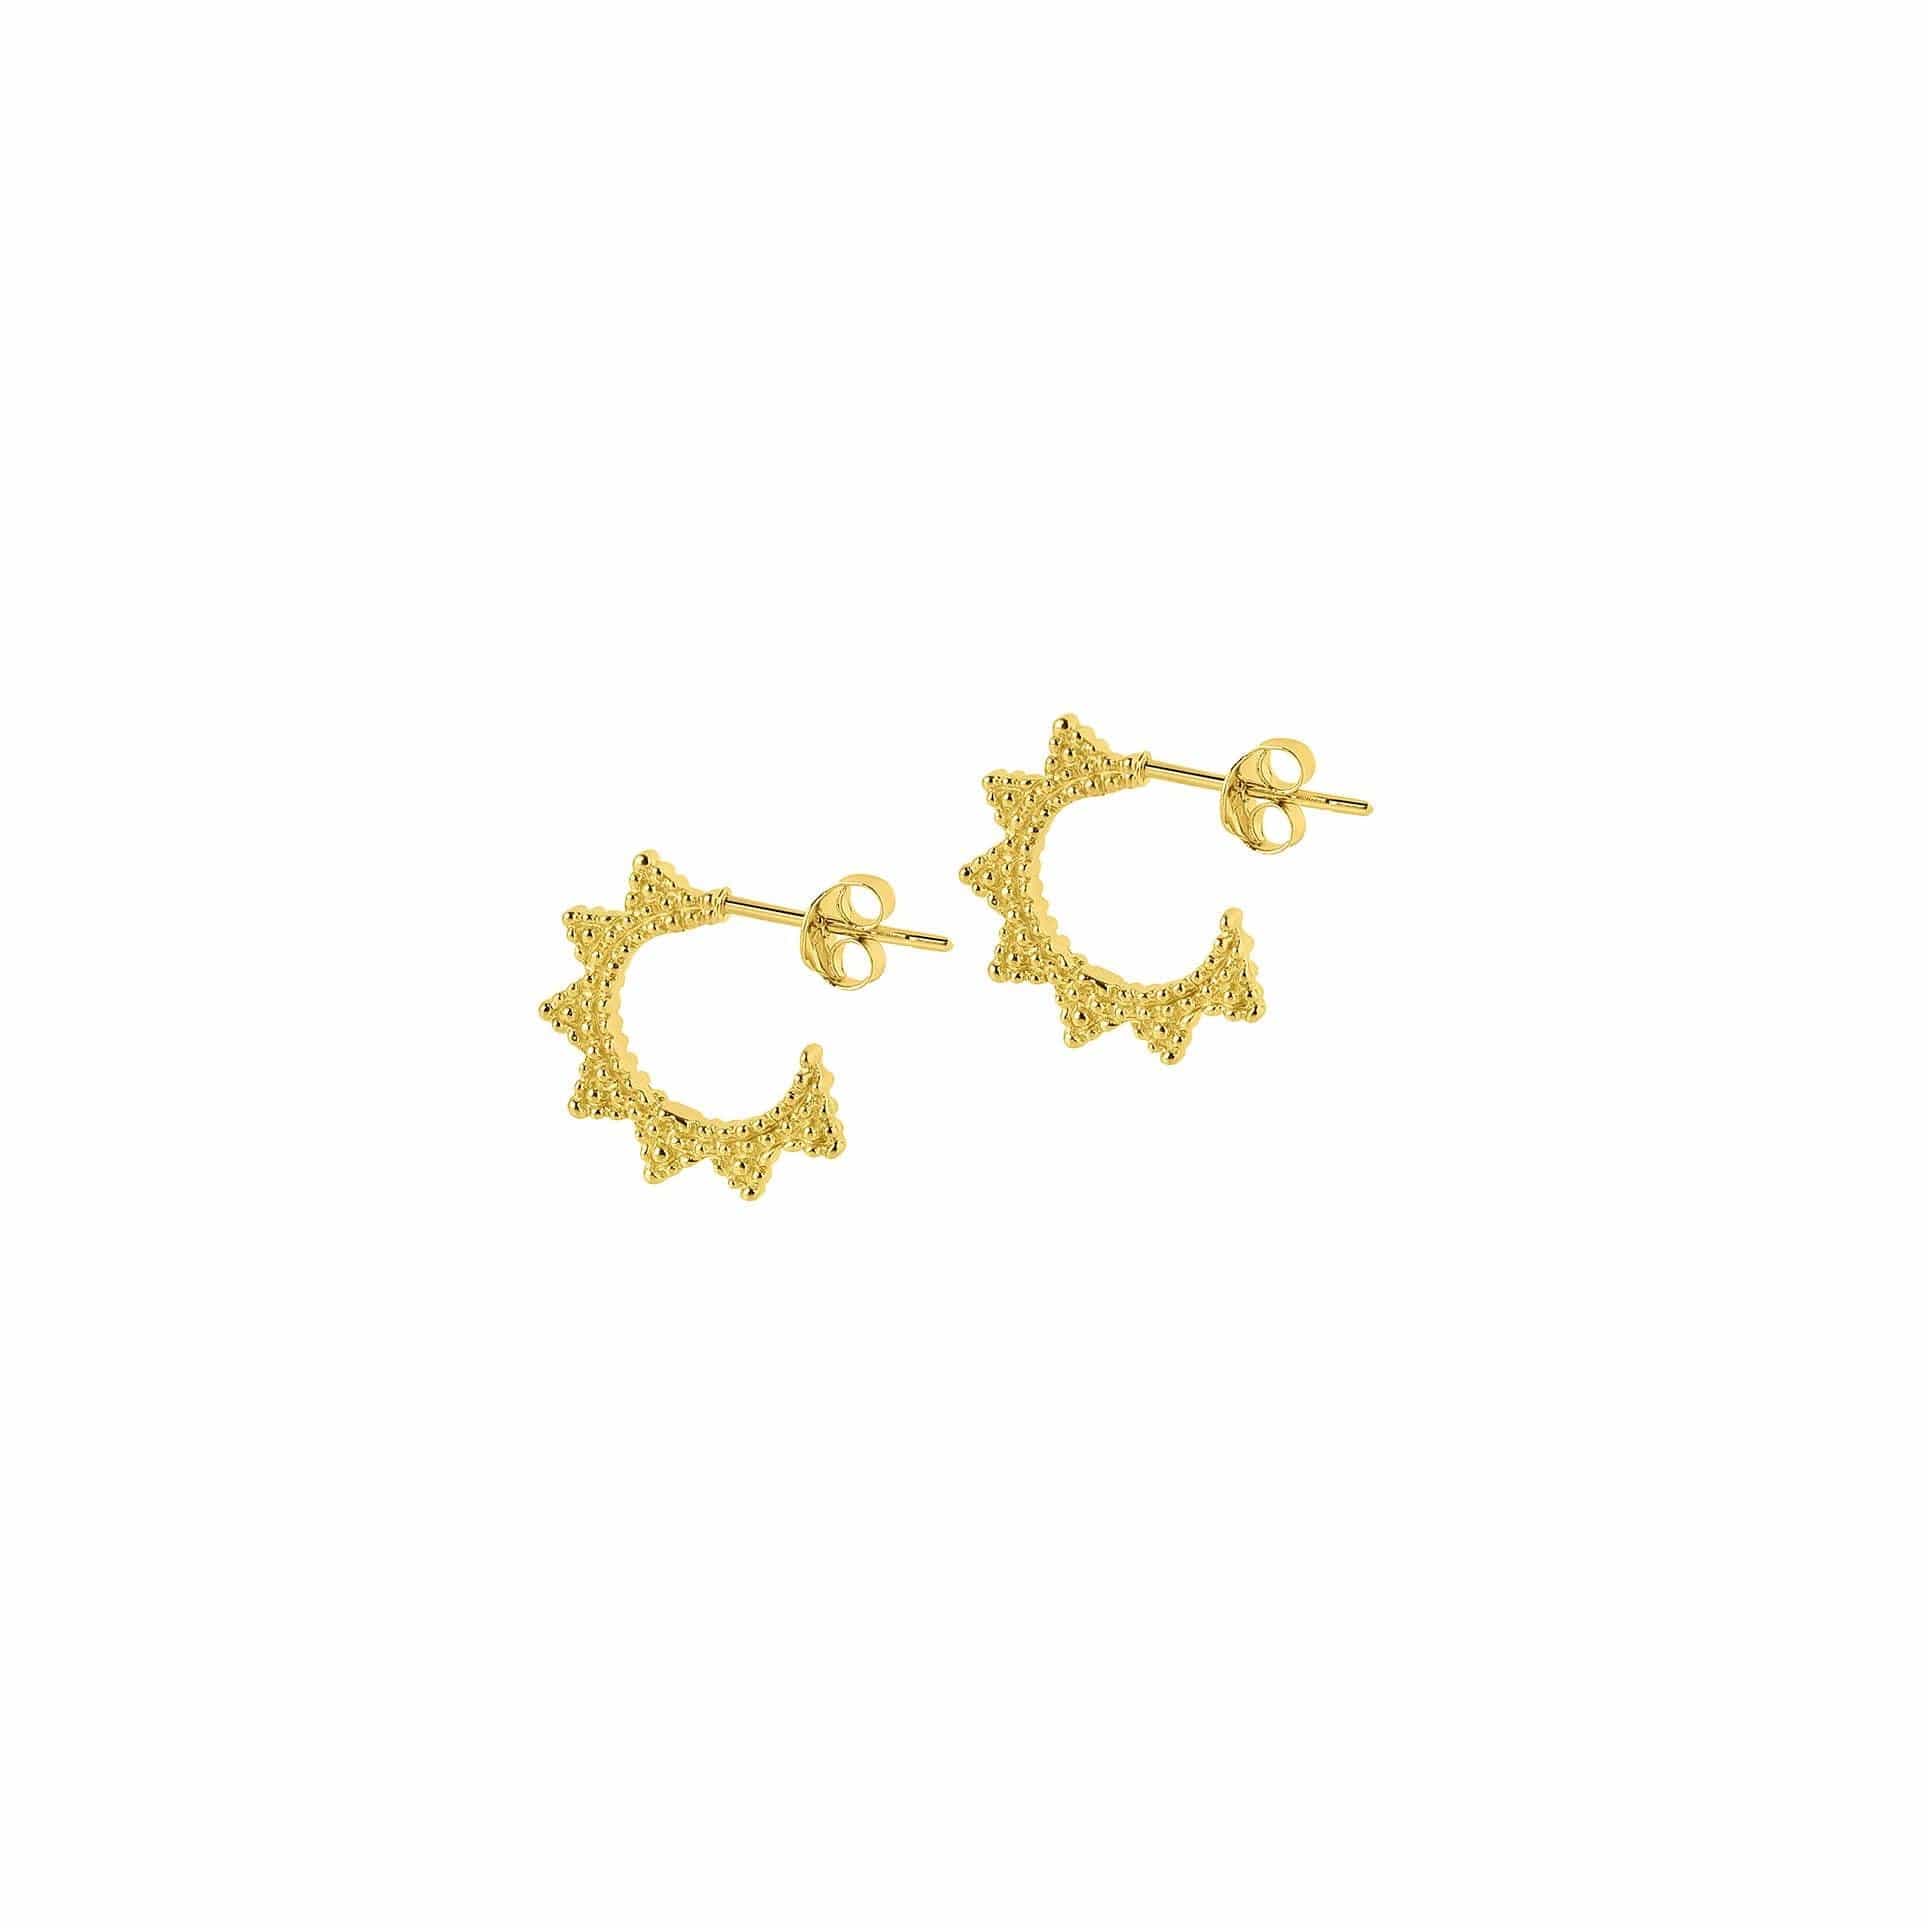 Small Gold Plated Indian Star Hoop Earrings